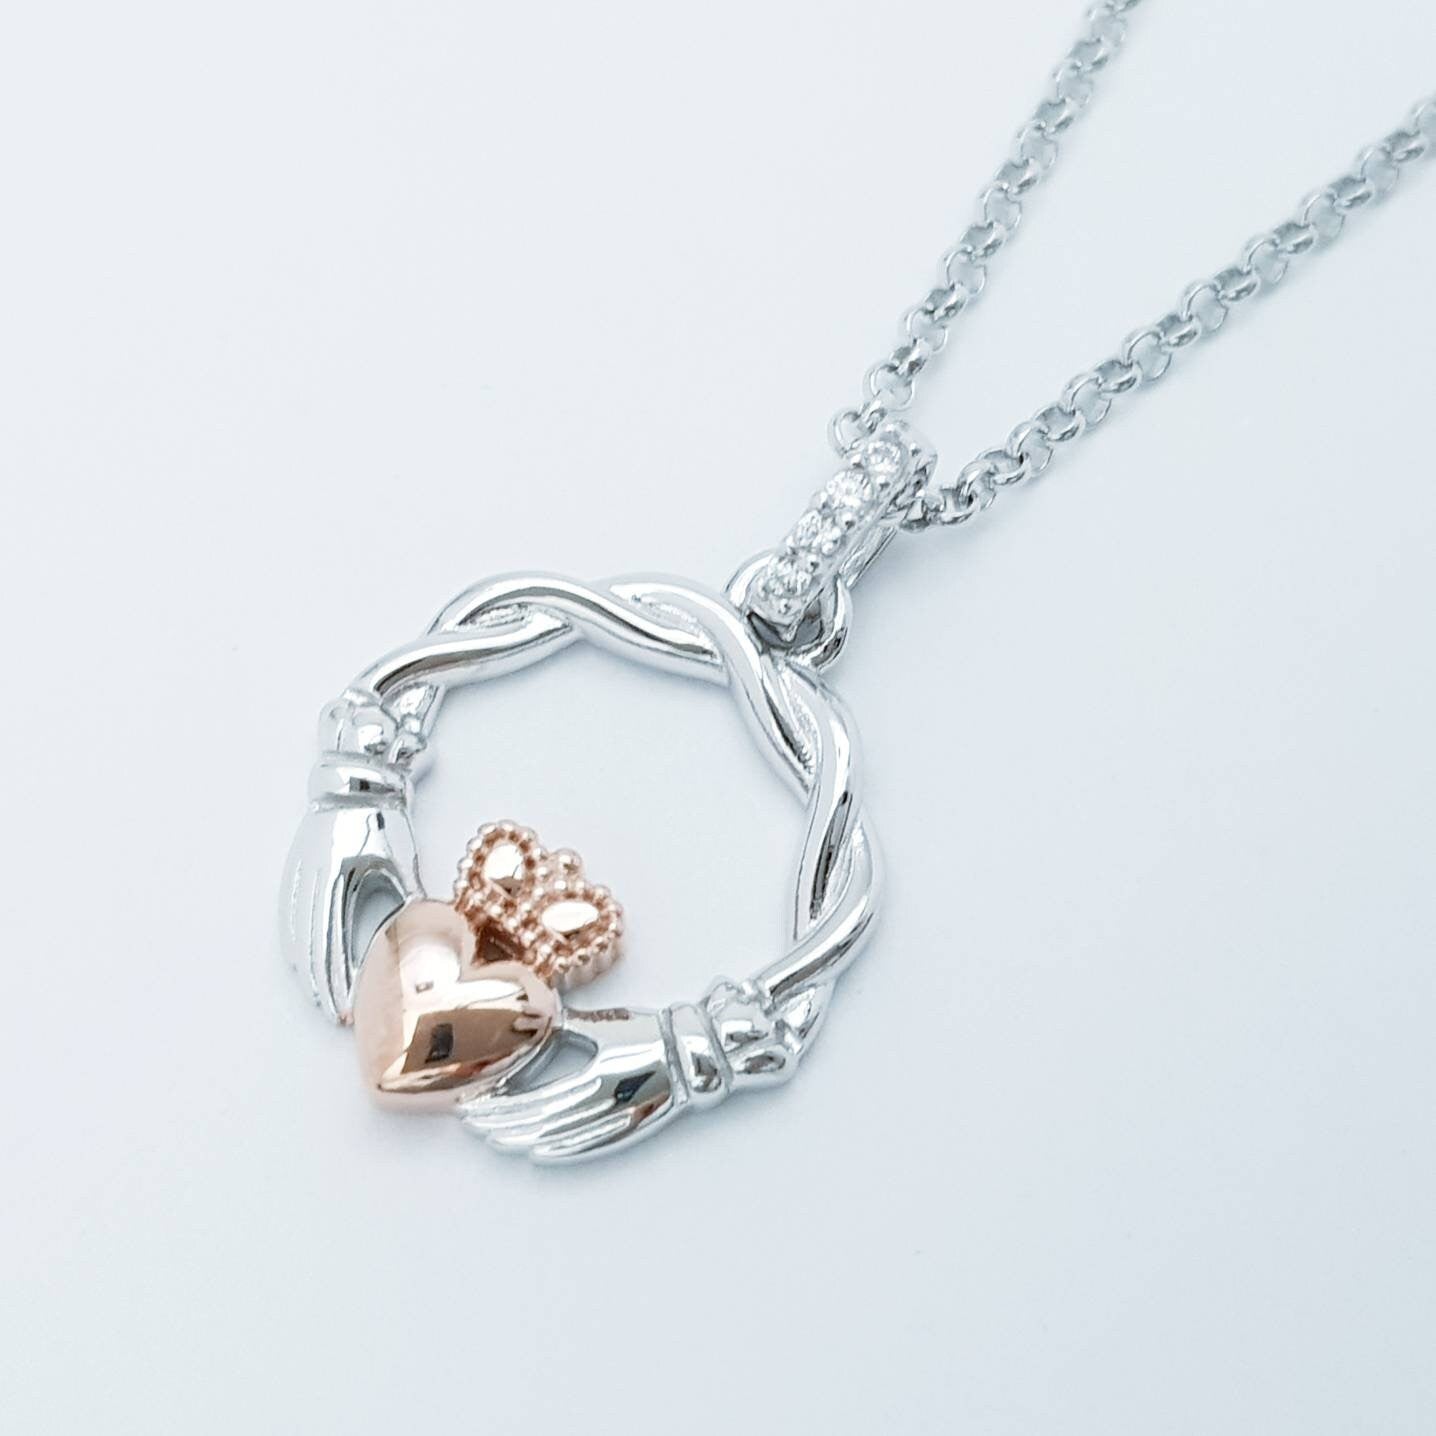 Dainty Sterling Silver claddagh necklace with rose gold plating and intertwined celtic braid.